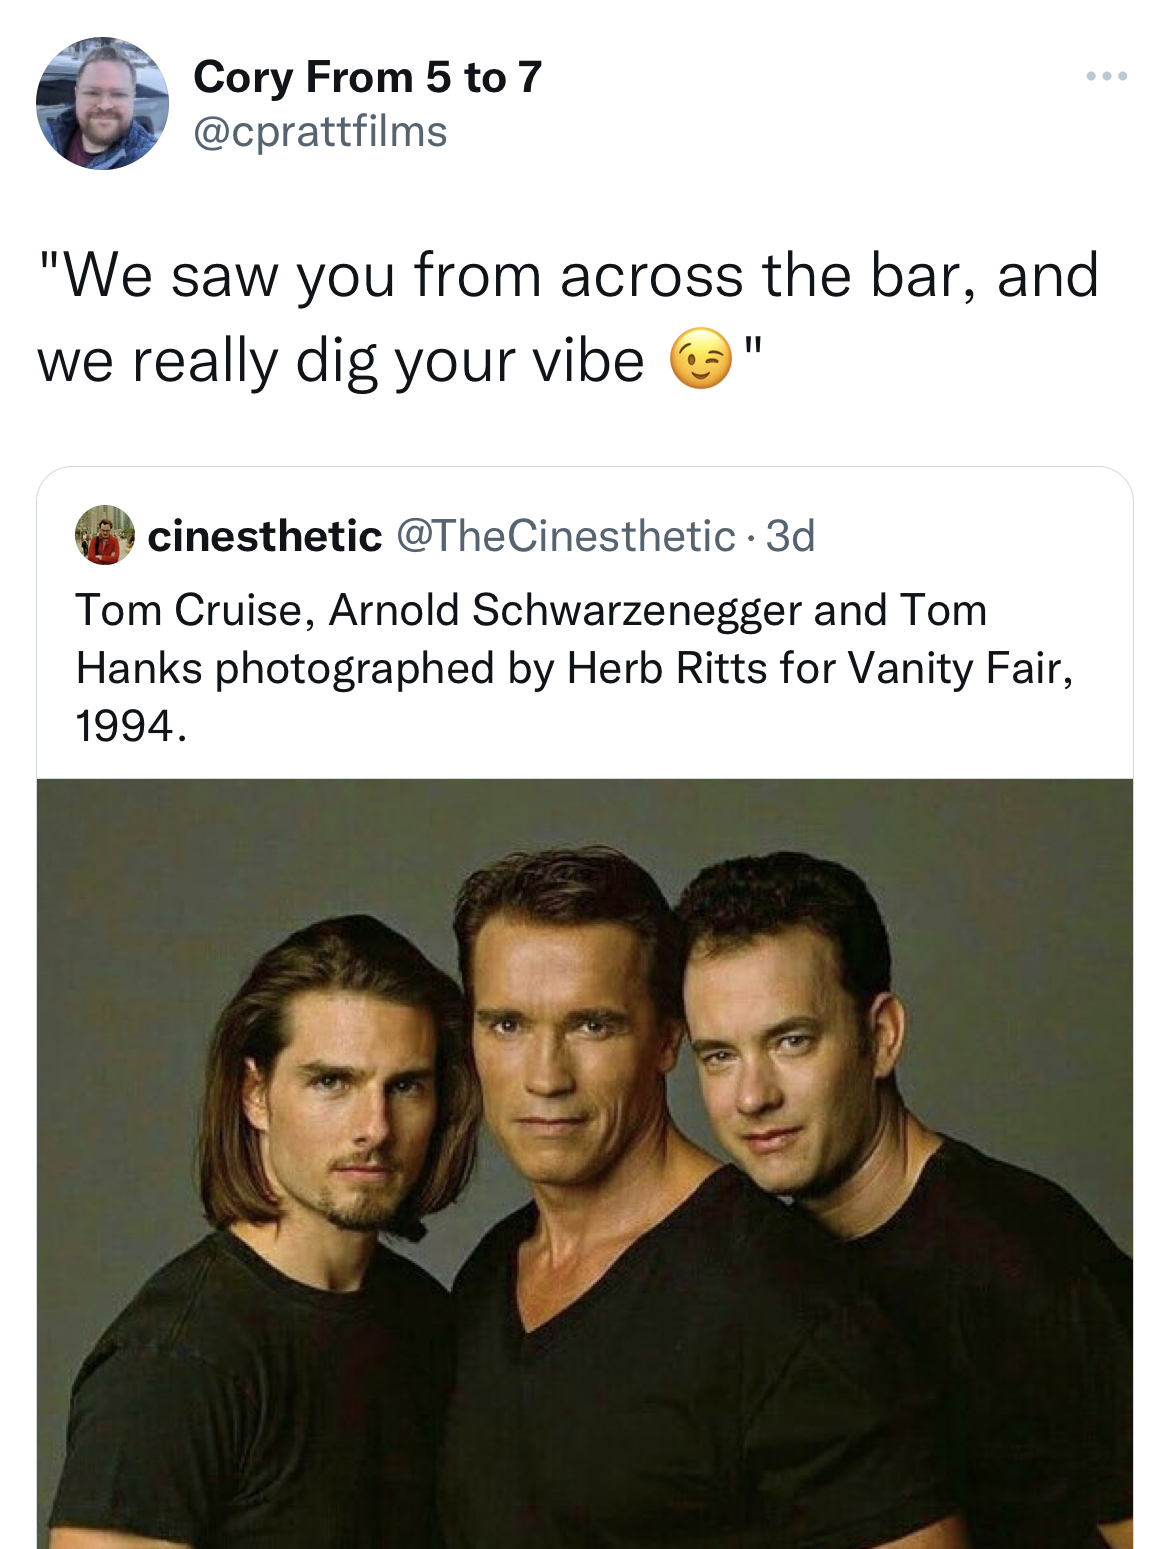 swinger memes across the bar - tom cruie arnold schwarzenegger - Cory From 5 to 7 "We saw you from across the bar, and we really dig your vibe 11 www cinesthetic 3d Tom Cruise, Arnold Schwarzenegger and Tom Hanks photographed by Herb Ritts for Vanity Fair